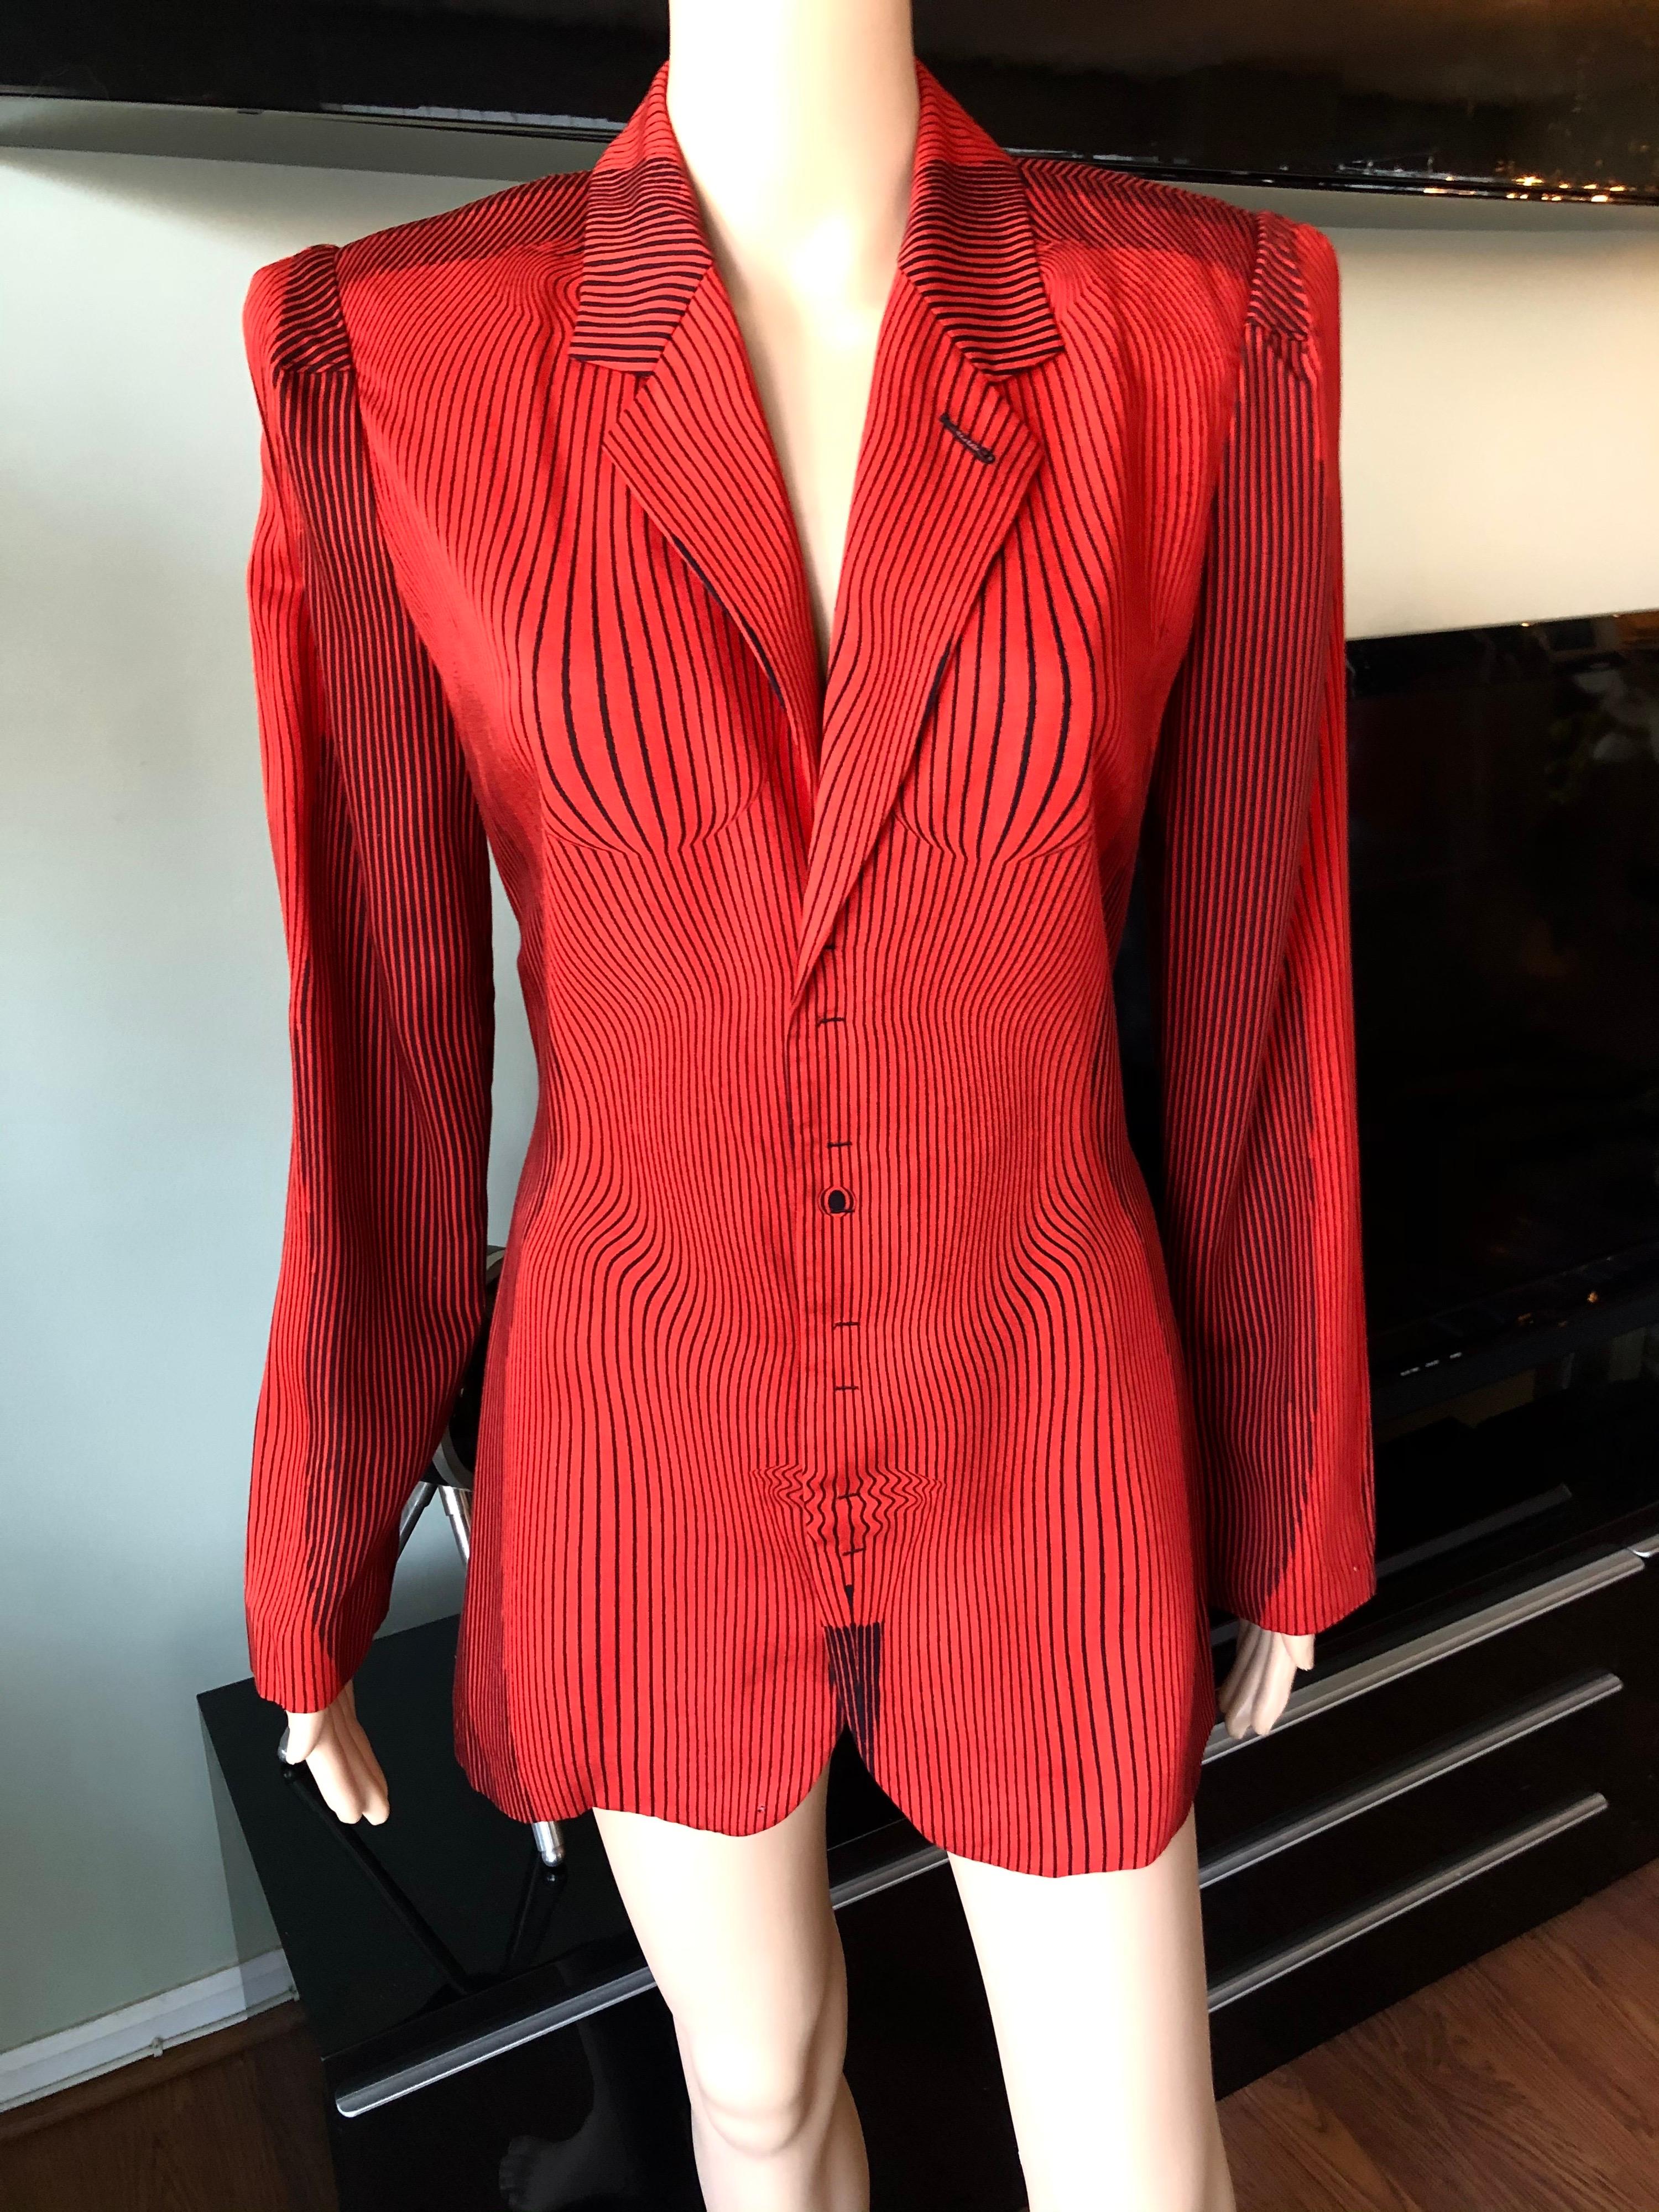 Jean Paul Gaultier S/S 1996 Vintage Cyberbaba Optical Illusion Jacket Blazer Top In Good Condition For Sale In Naples, FL